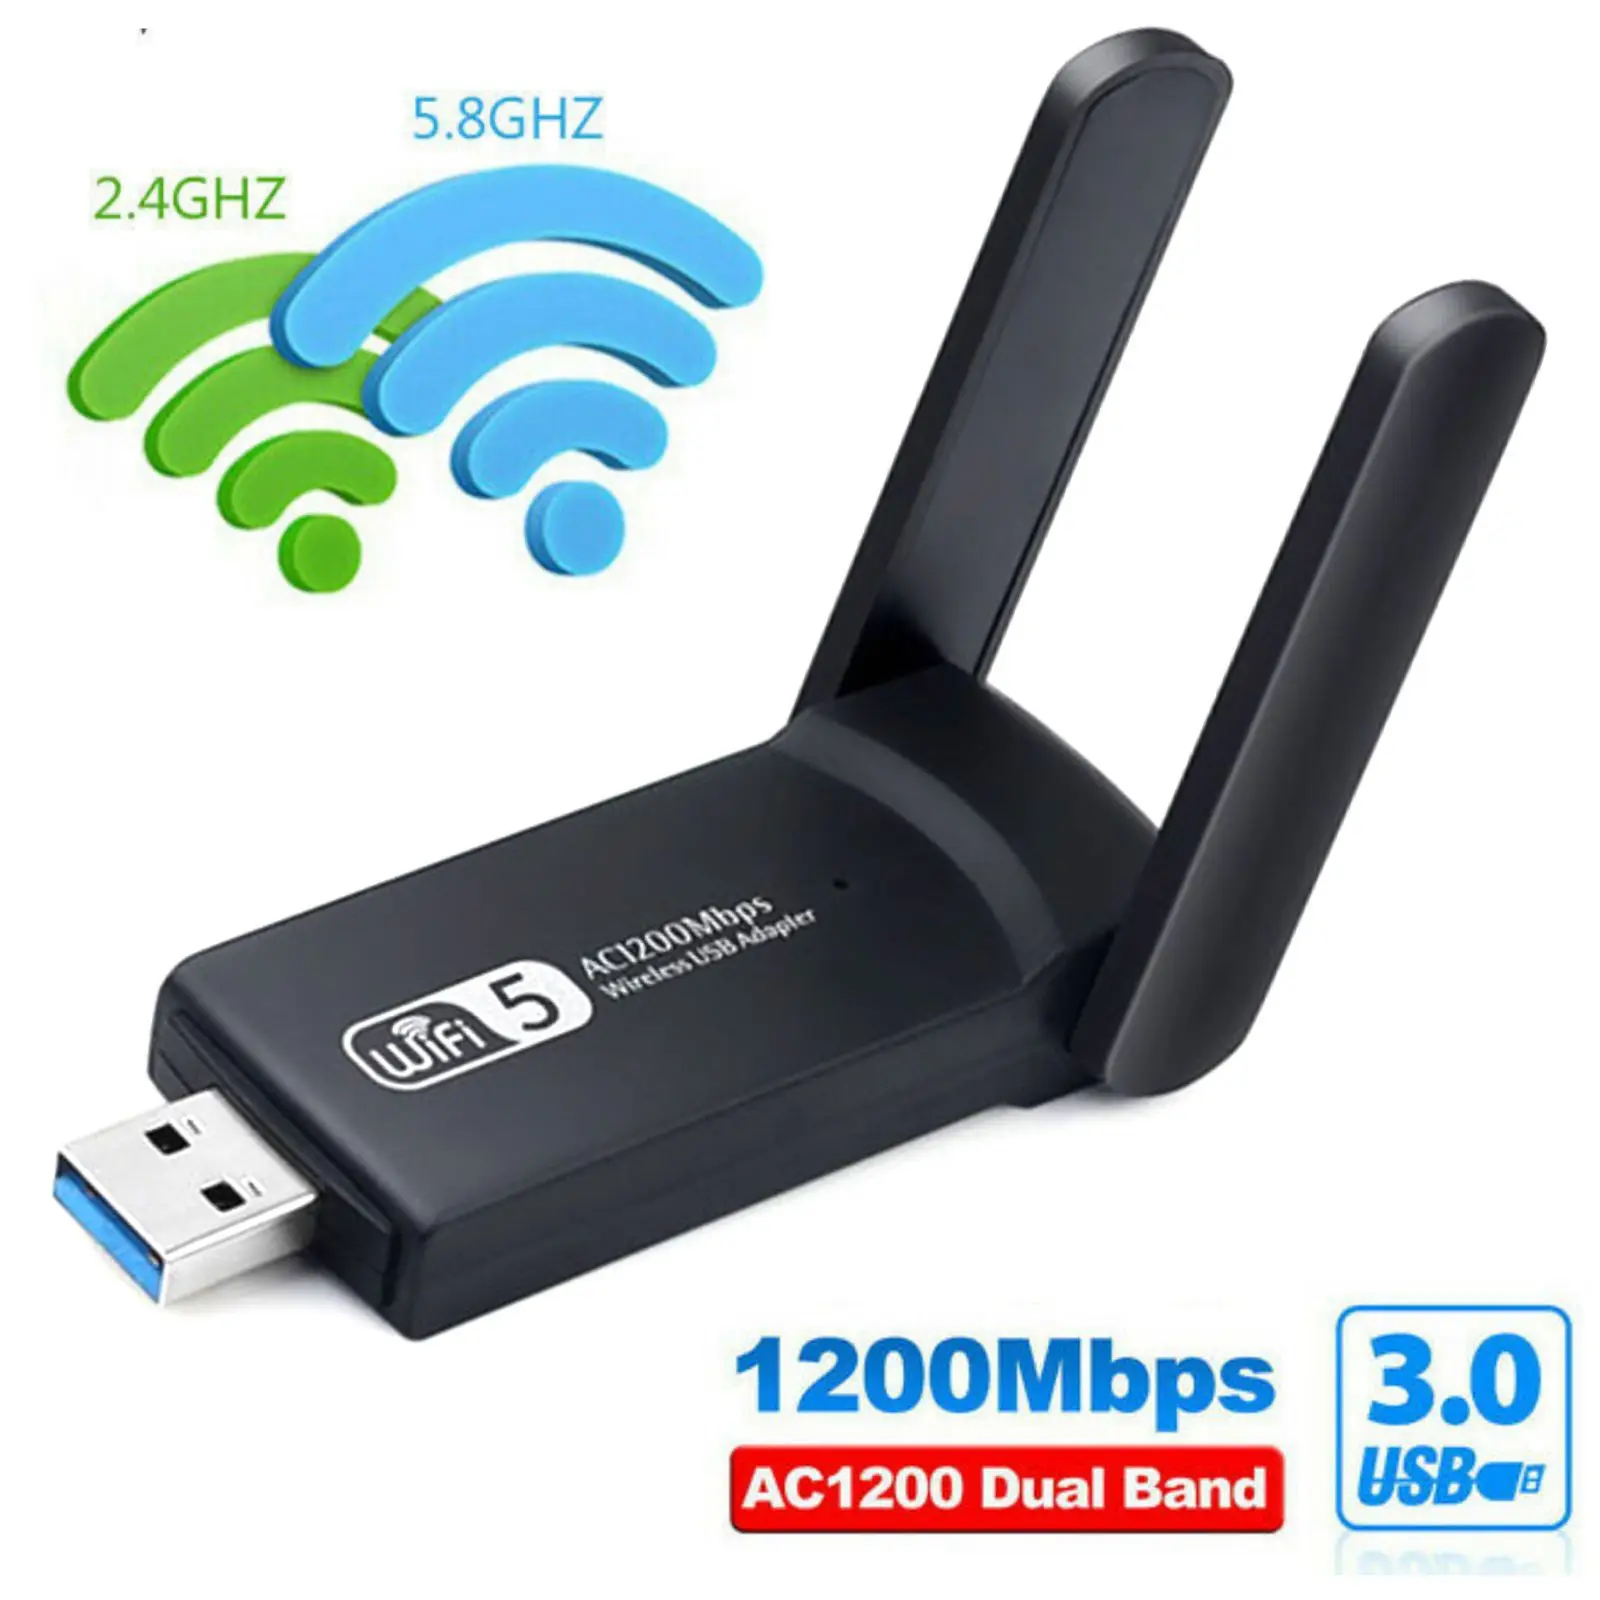 

USB 3.0 1200Mbps Wifi Adapter Dual Band 5GHz 2.4Ghz 802.11AC RTL8812BU Wifi Antenna Dongle Network Card For Laptop Desktop